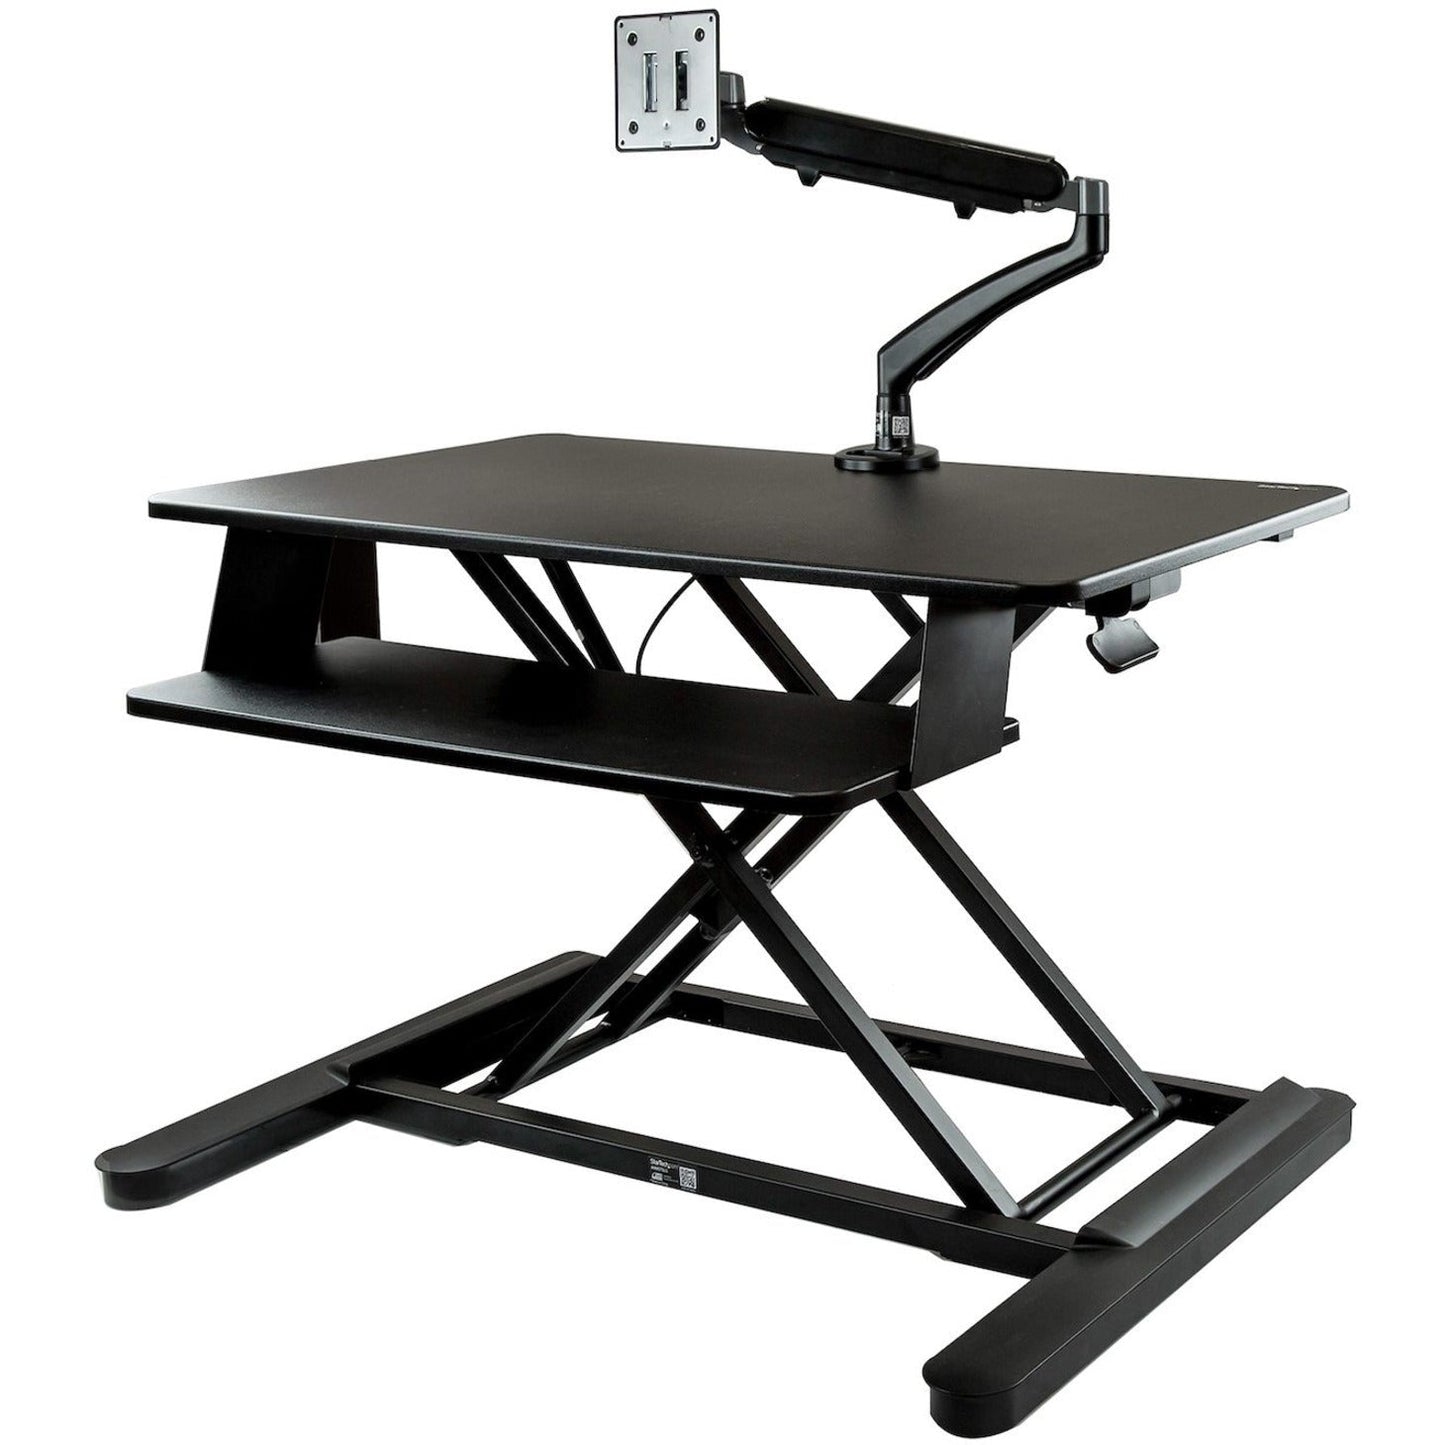 StarTech.com Sit-Stand Desk Converter with Monitor Arm - Up to 26" Monitor - 35&acirc;&euro;Â Wide Work Surface - Height Adjustable Standing Desk Converter